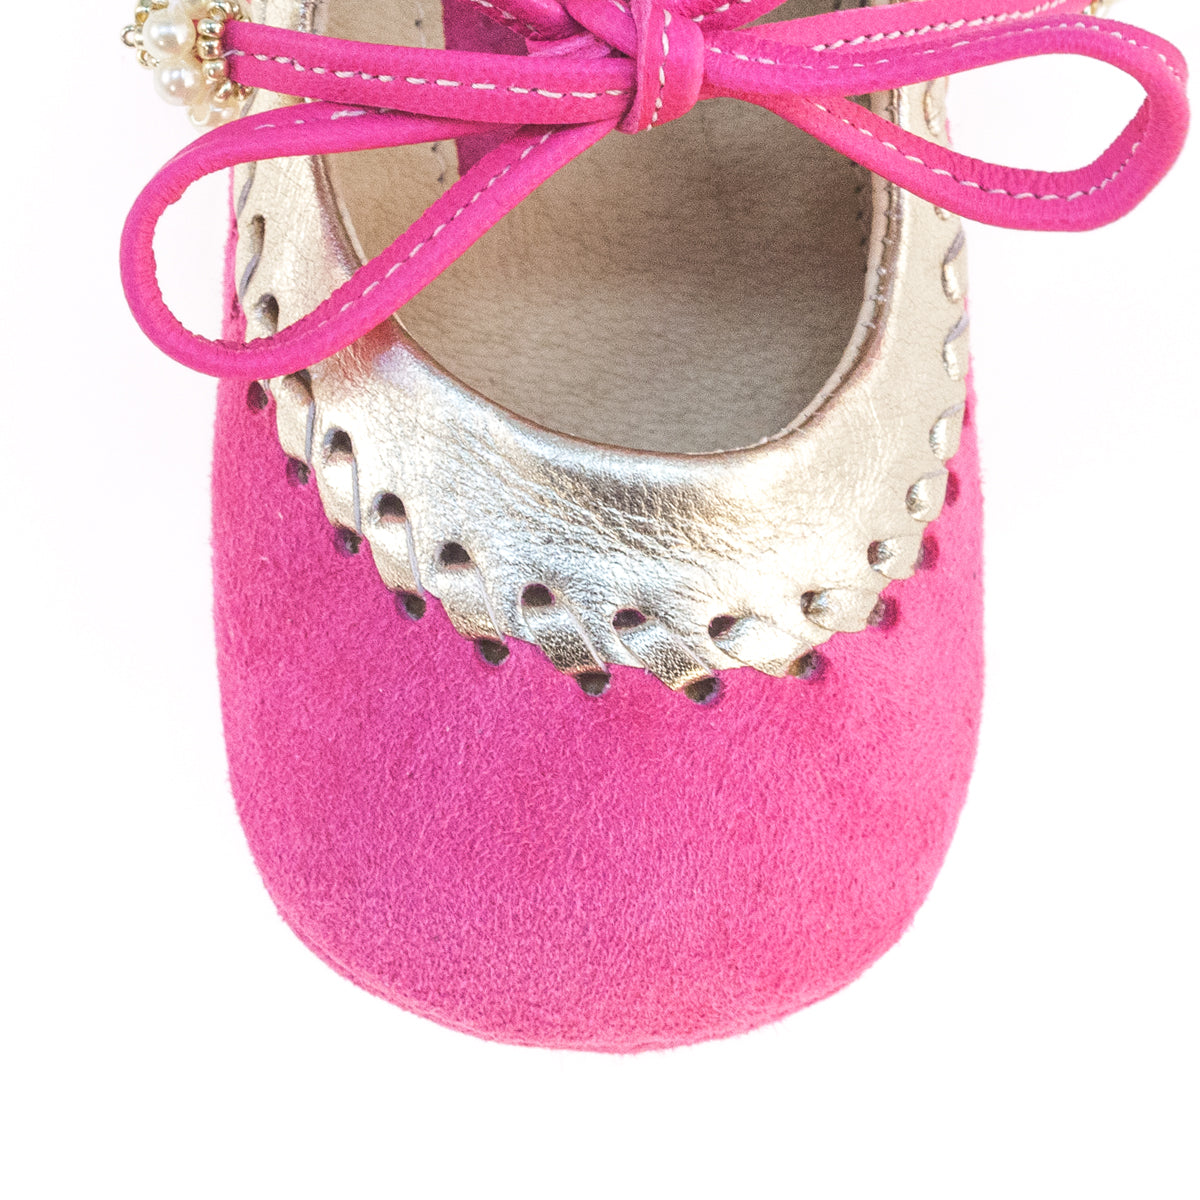 Vibys-Baby-Shoes-Camellia-details-view